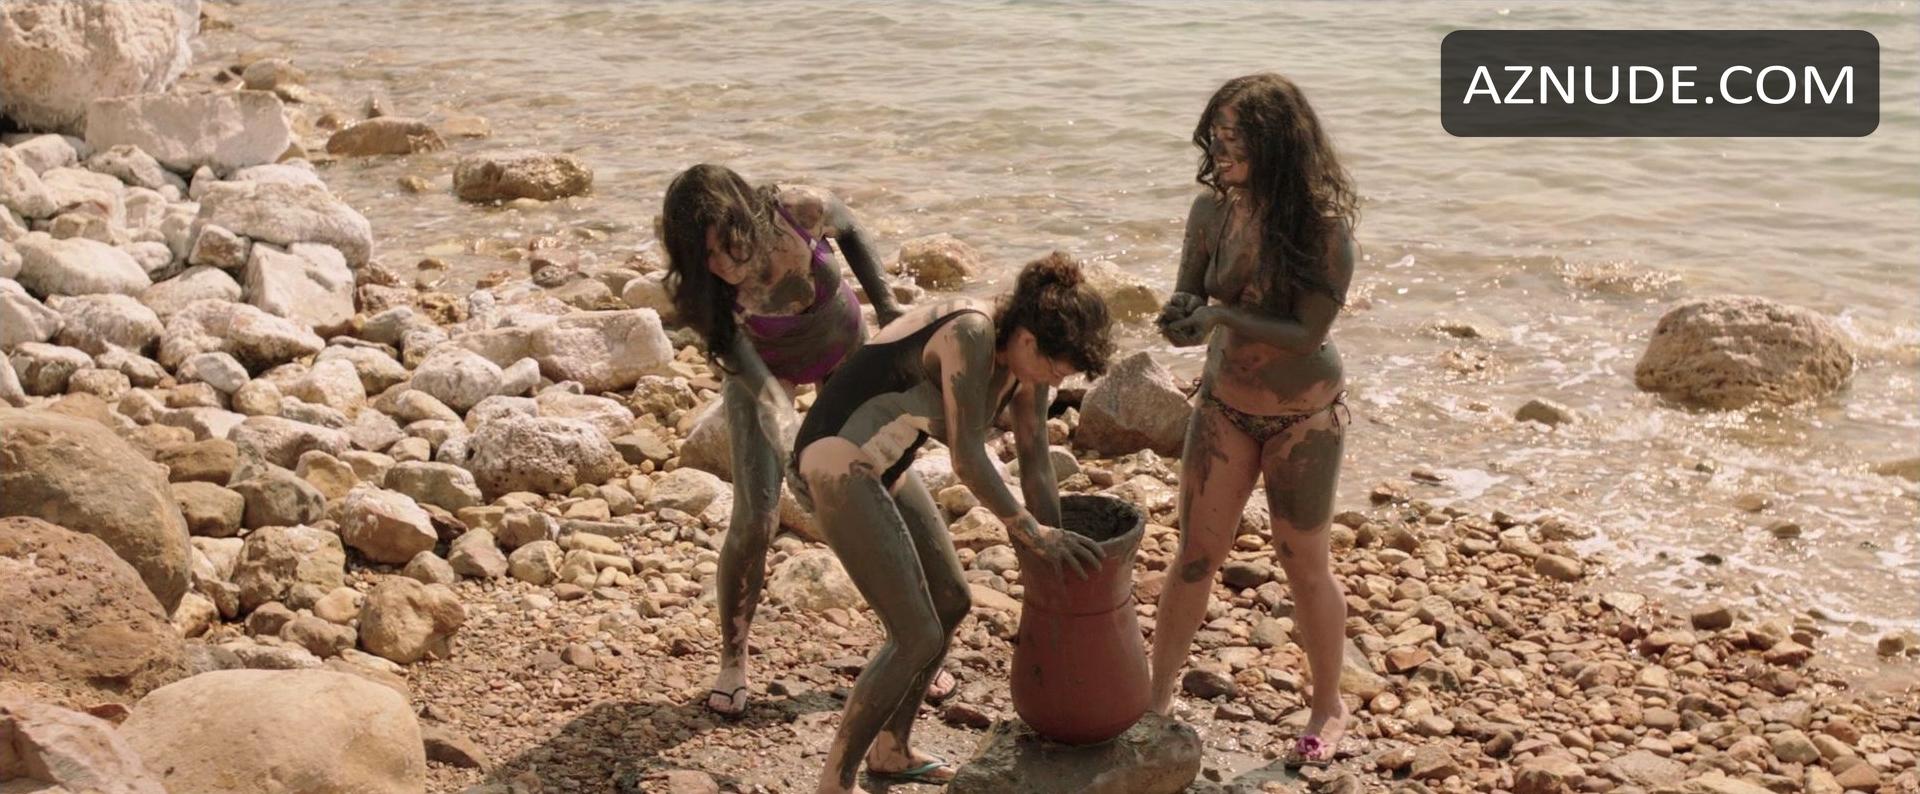 Browse Celebrity Covered In Mud Images Page 2 Aznude